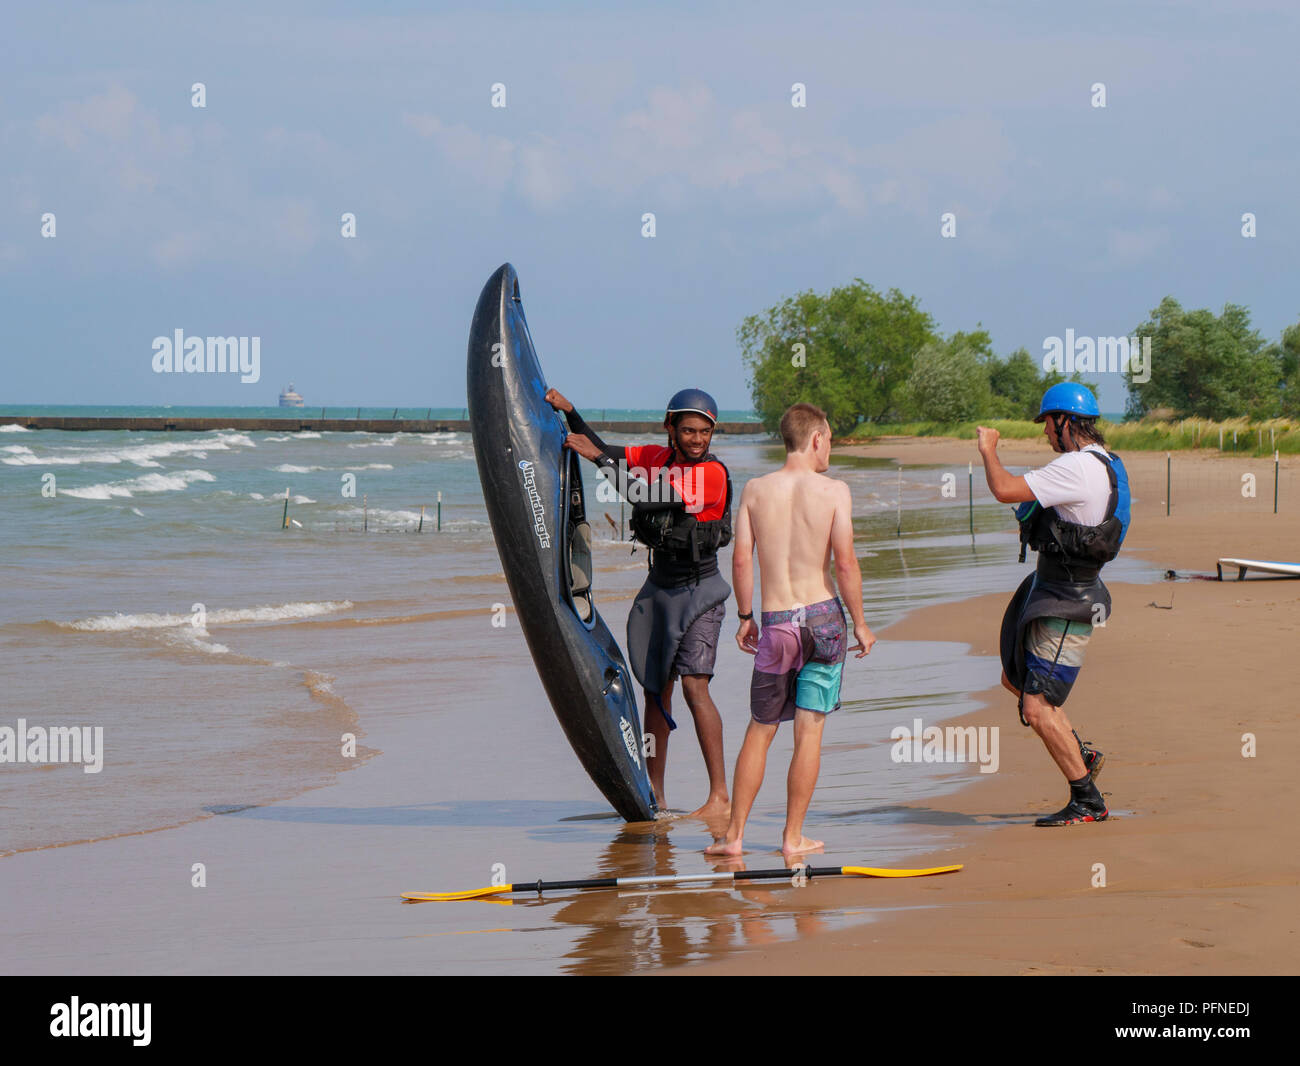 Chicago, Illinois, USA. 21st August 2018. A kayaker poses for a photo before heading out into the surf at Montrose Beach. Stiff northeast winds whipped up surf on Lake Michigan, bringing out kayakers, kite surfers and wave watchers. Credit: Todd Bannor/Alamy Live News Stock Photo